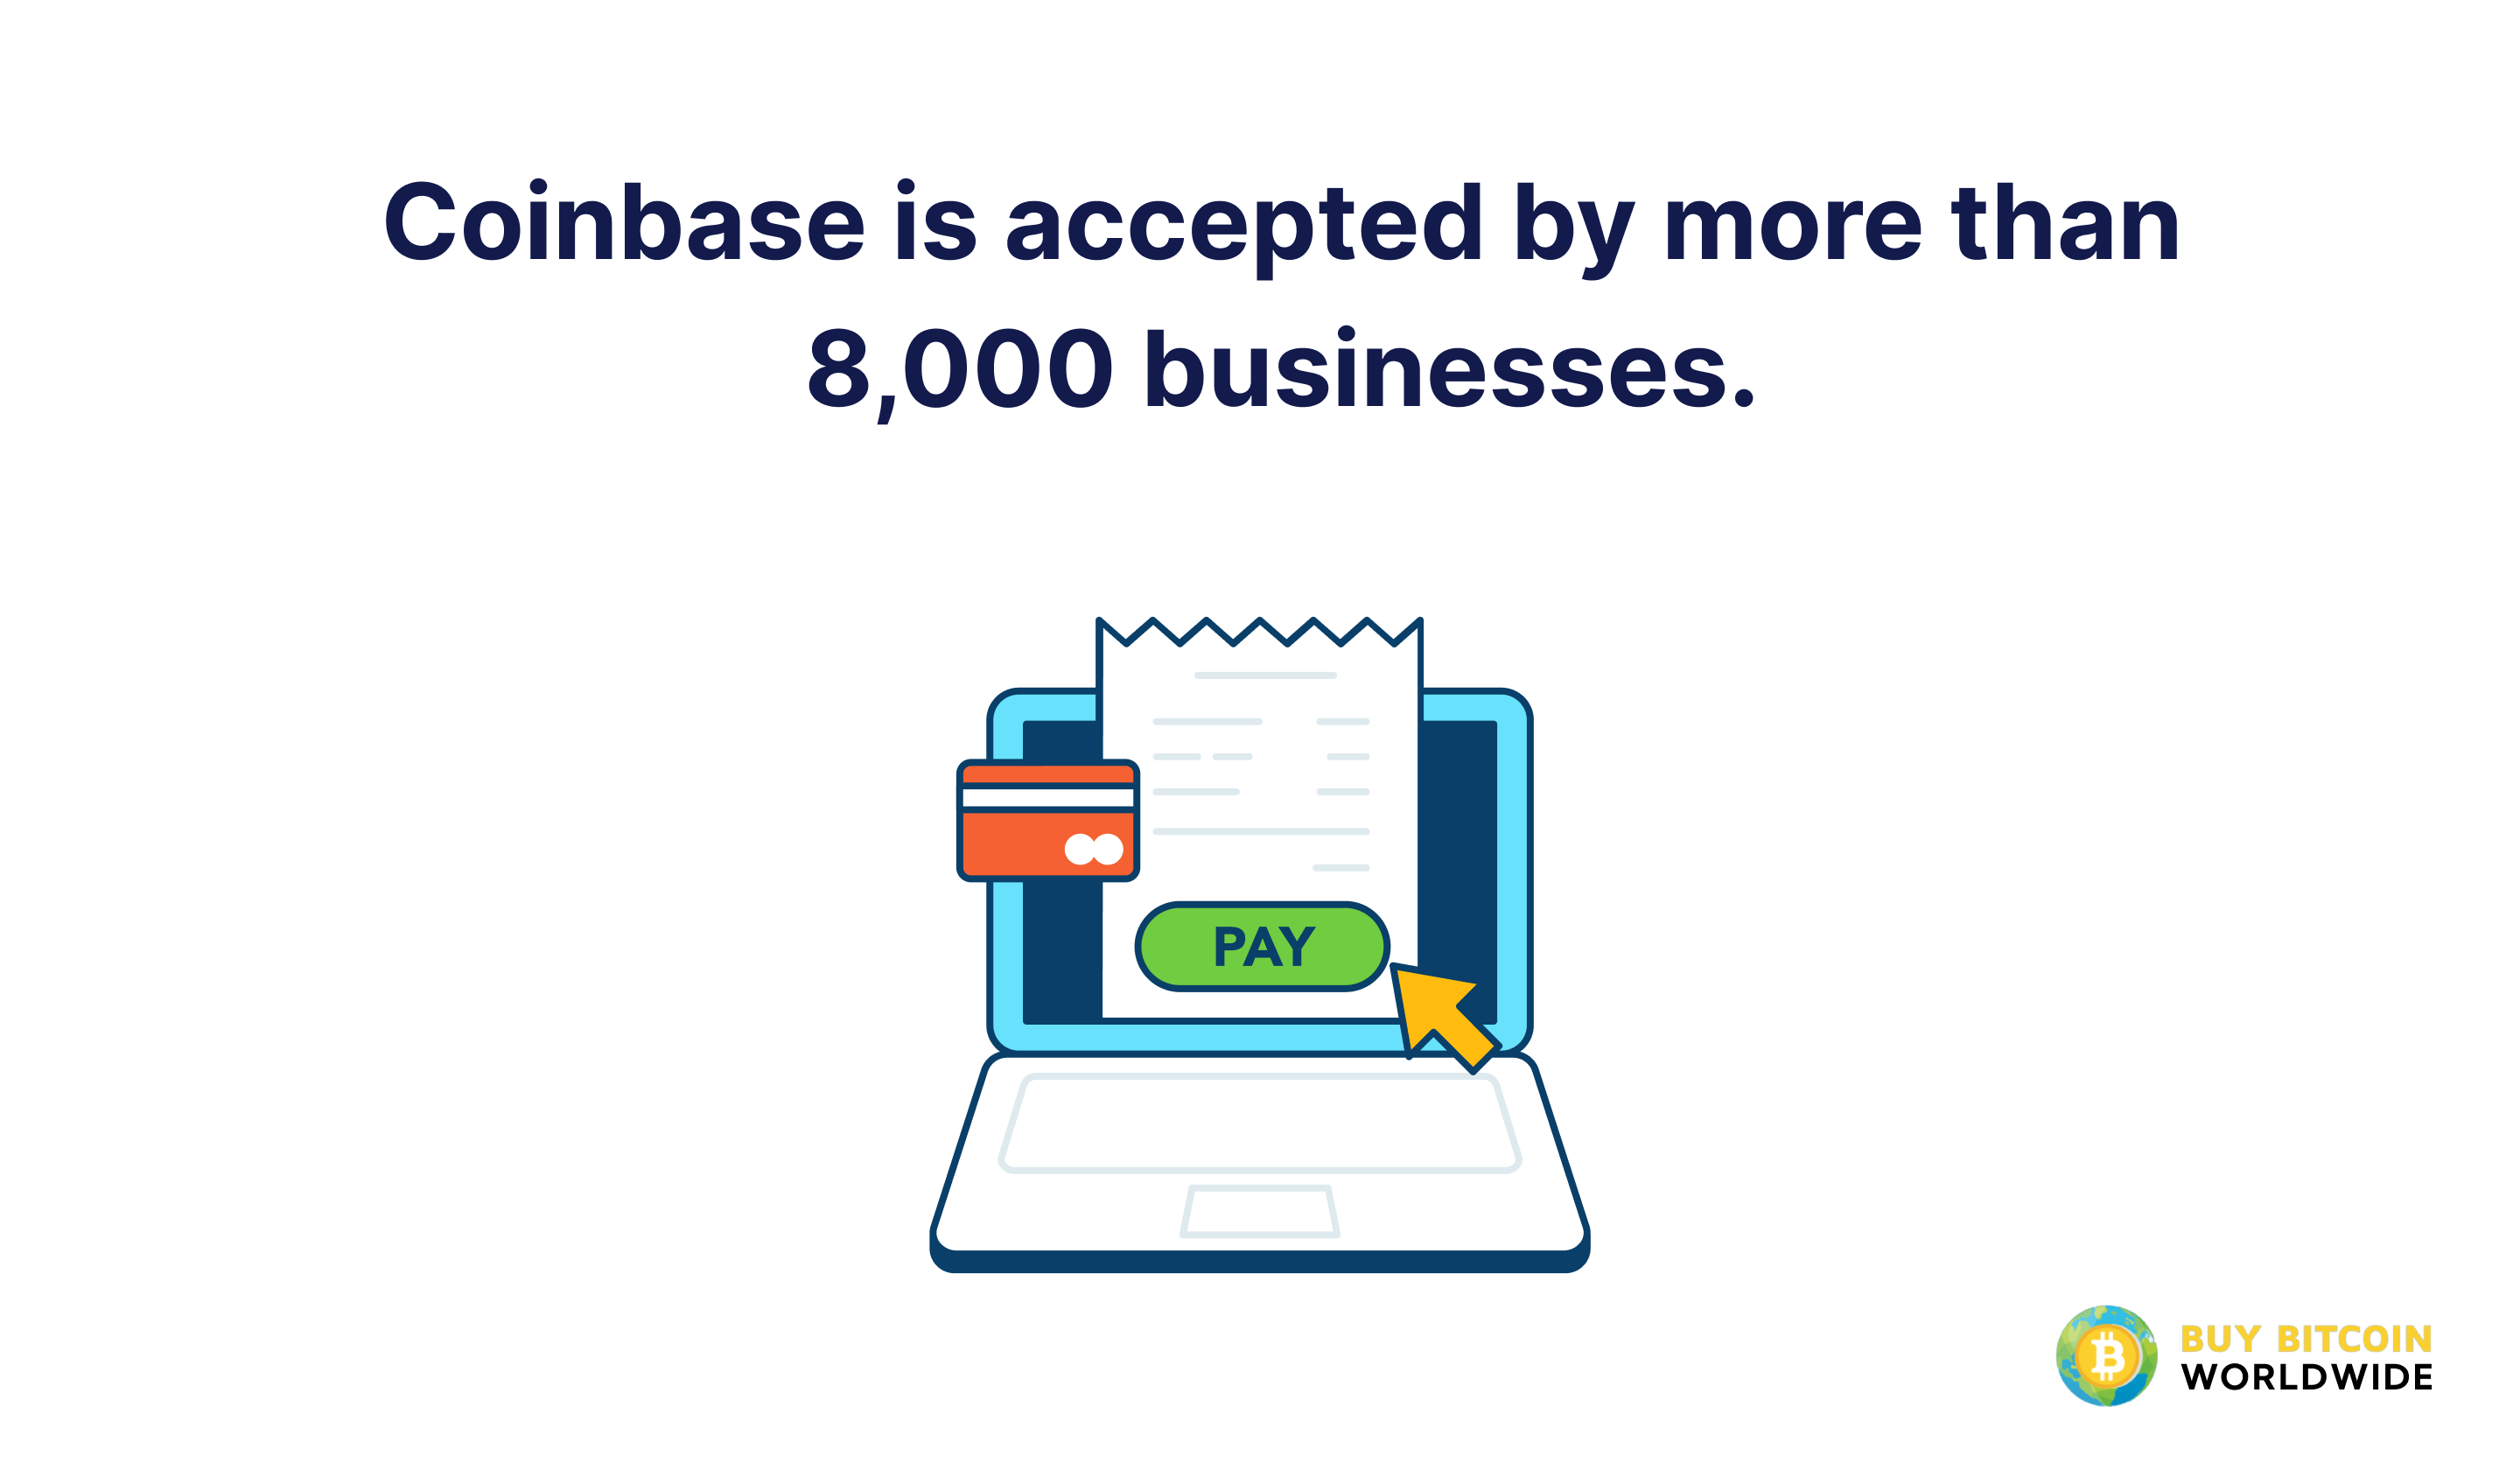 more than 8,000 businesses accept coinbase payments